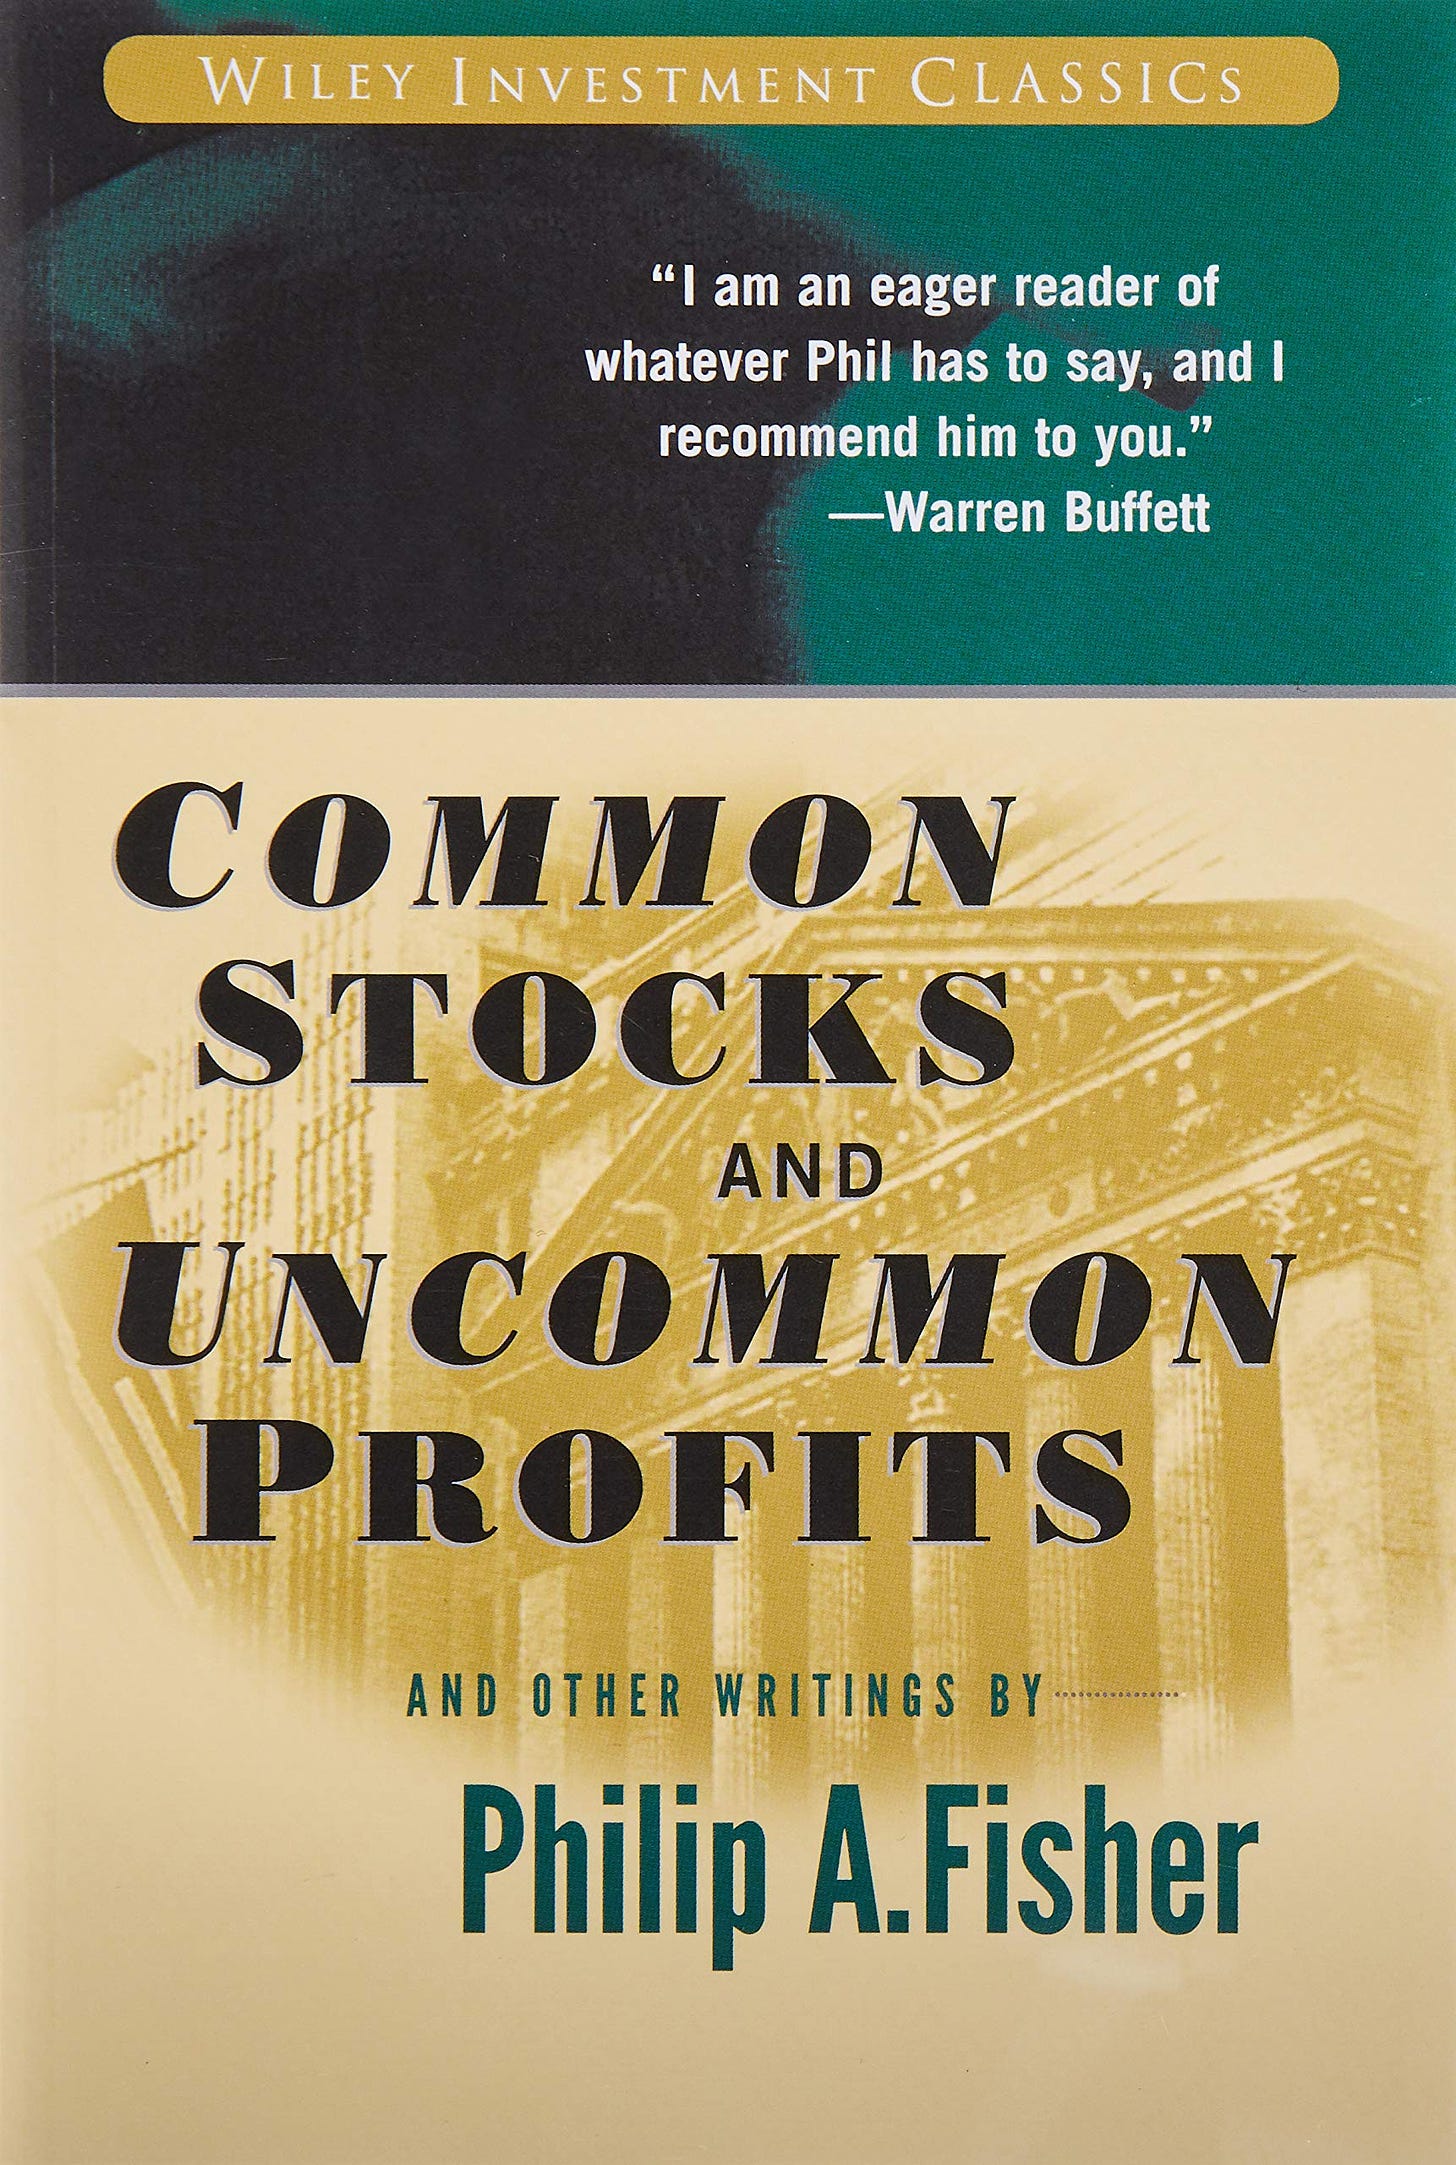 Common Stocks and Uncommon Profits and Other Writings: 40 (Wiley Investment  Classics): Amazon.co.uk: Fisher, Philip A., Fisher, Kenneth L.:  9780471445500: Books